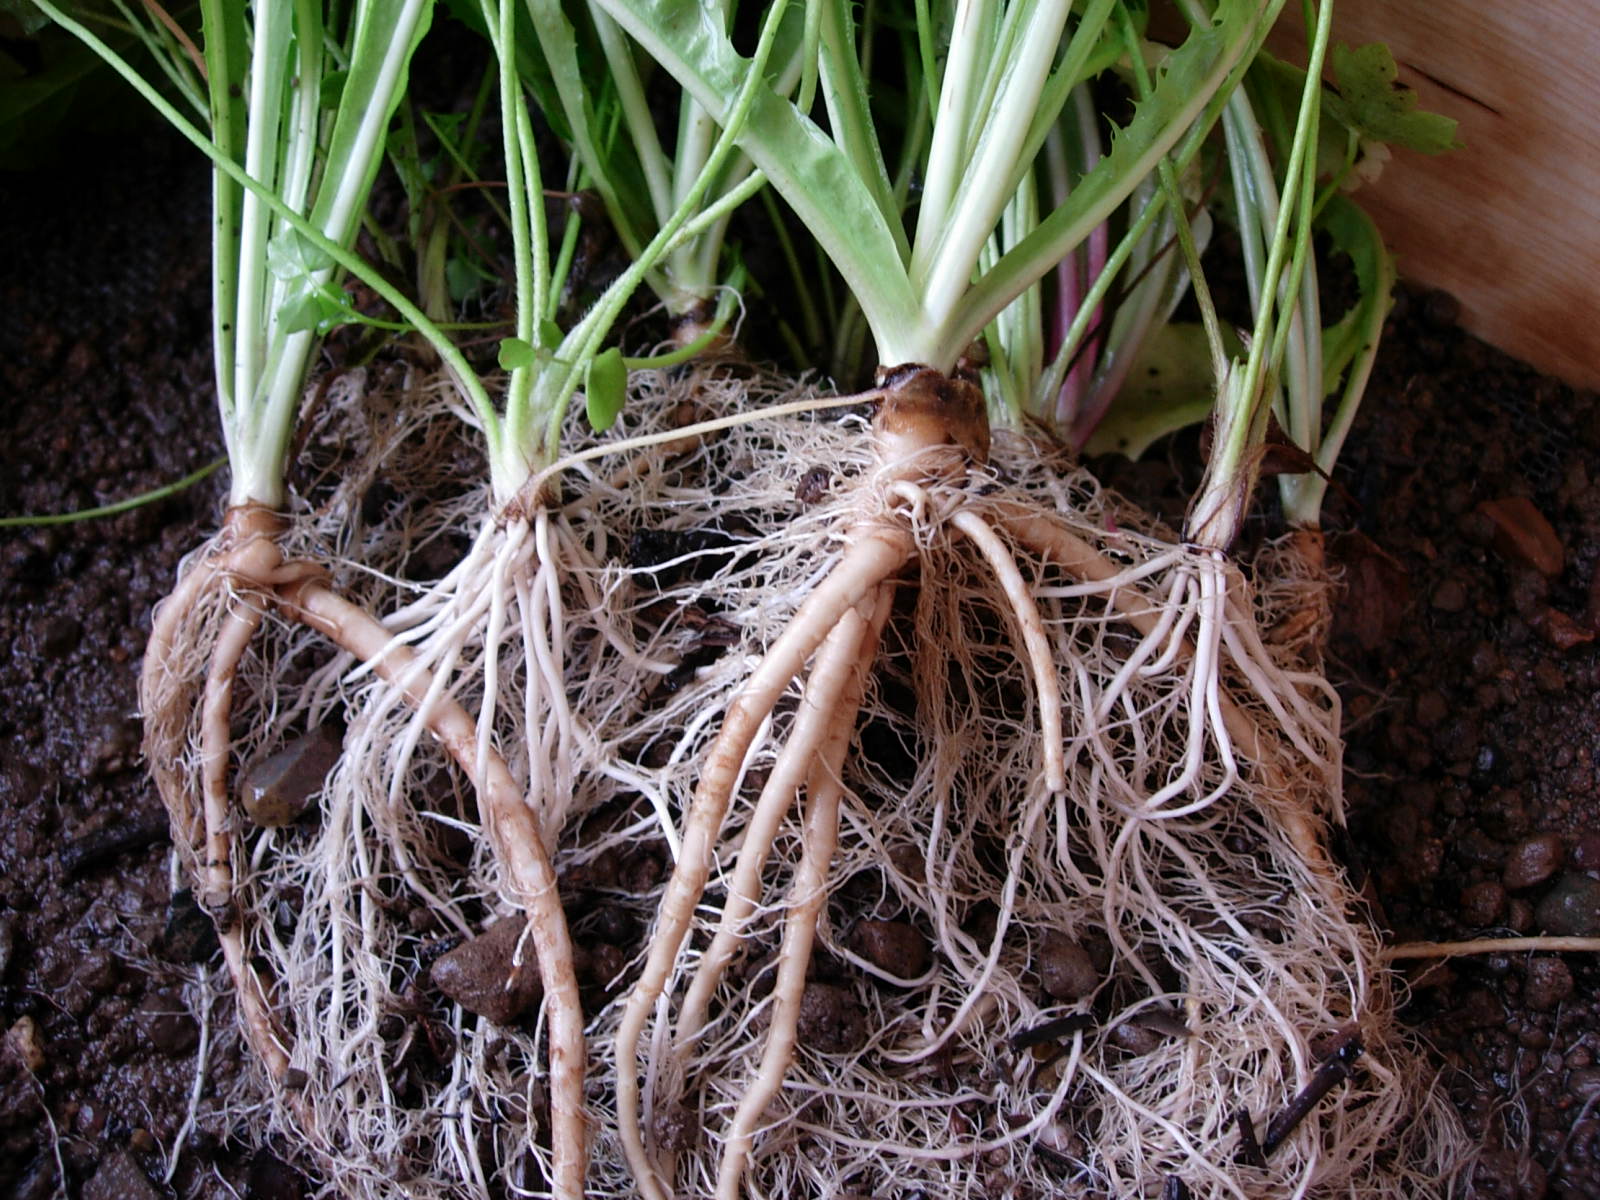 Enlarged view: Roots